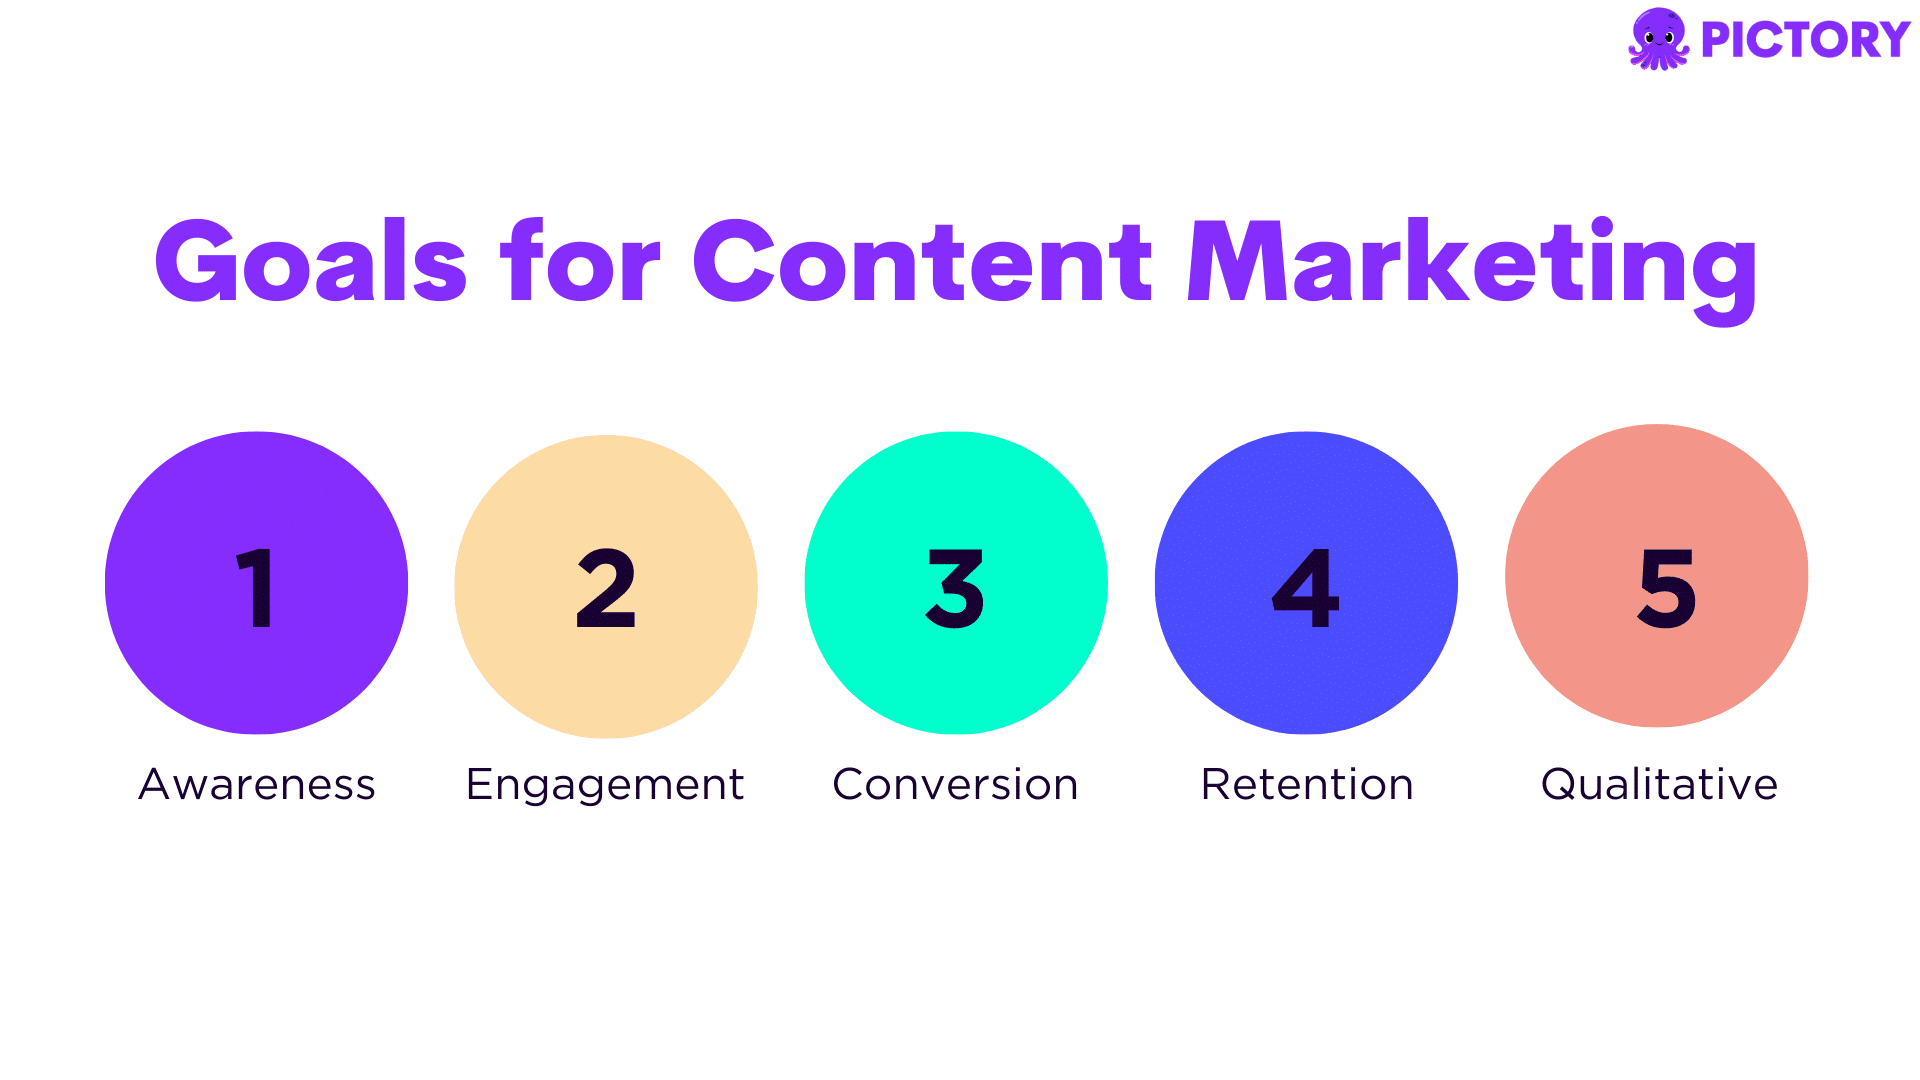 Objectives and Goals for Content Marketing